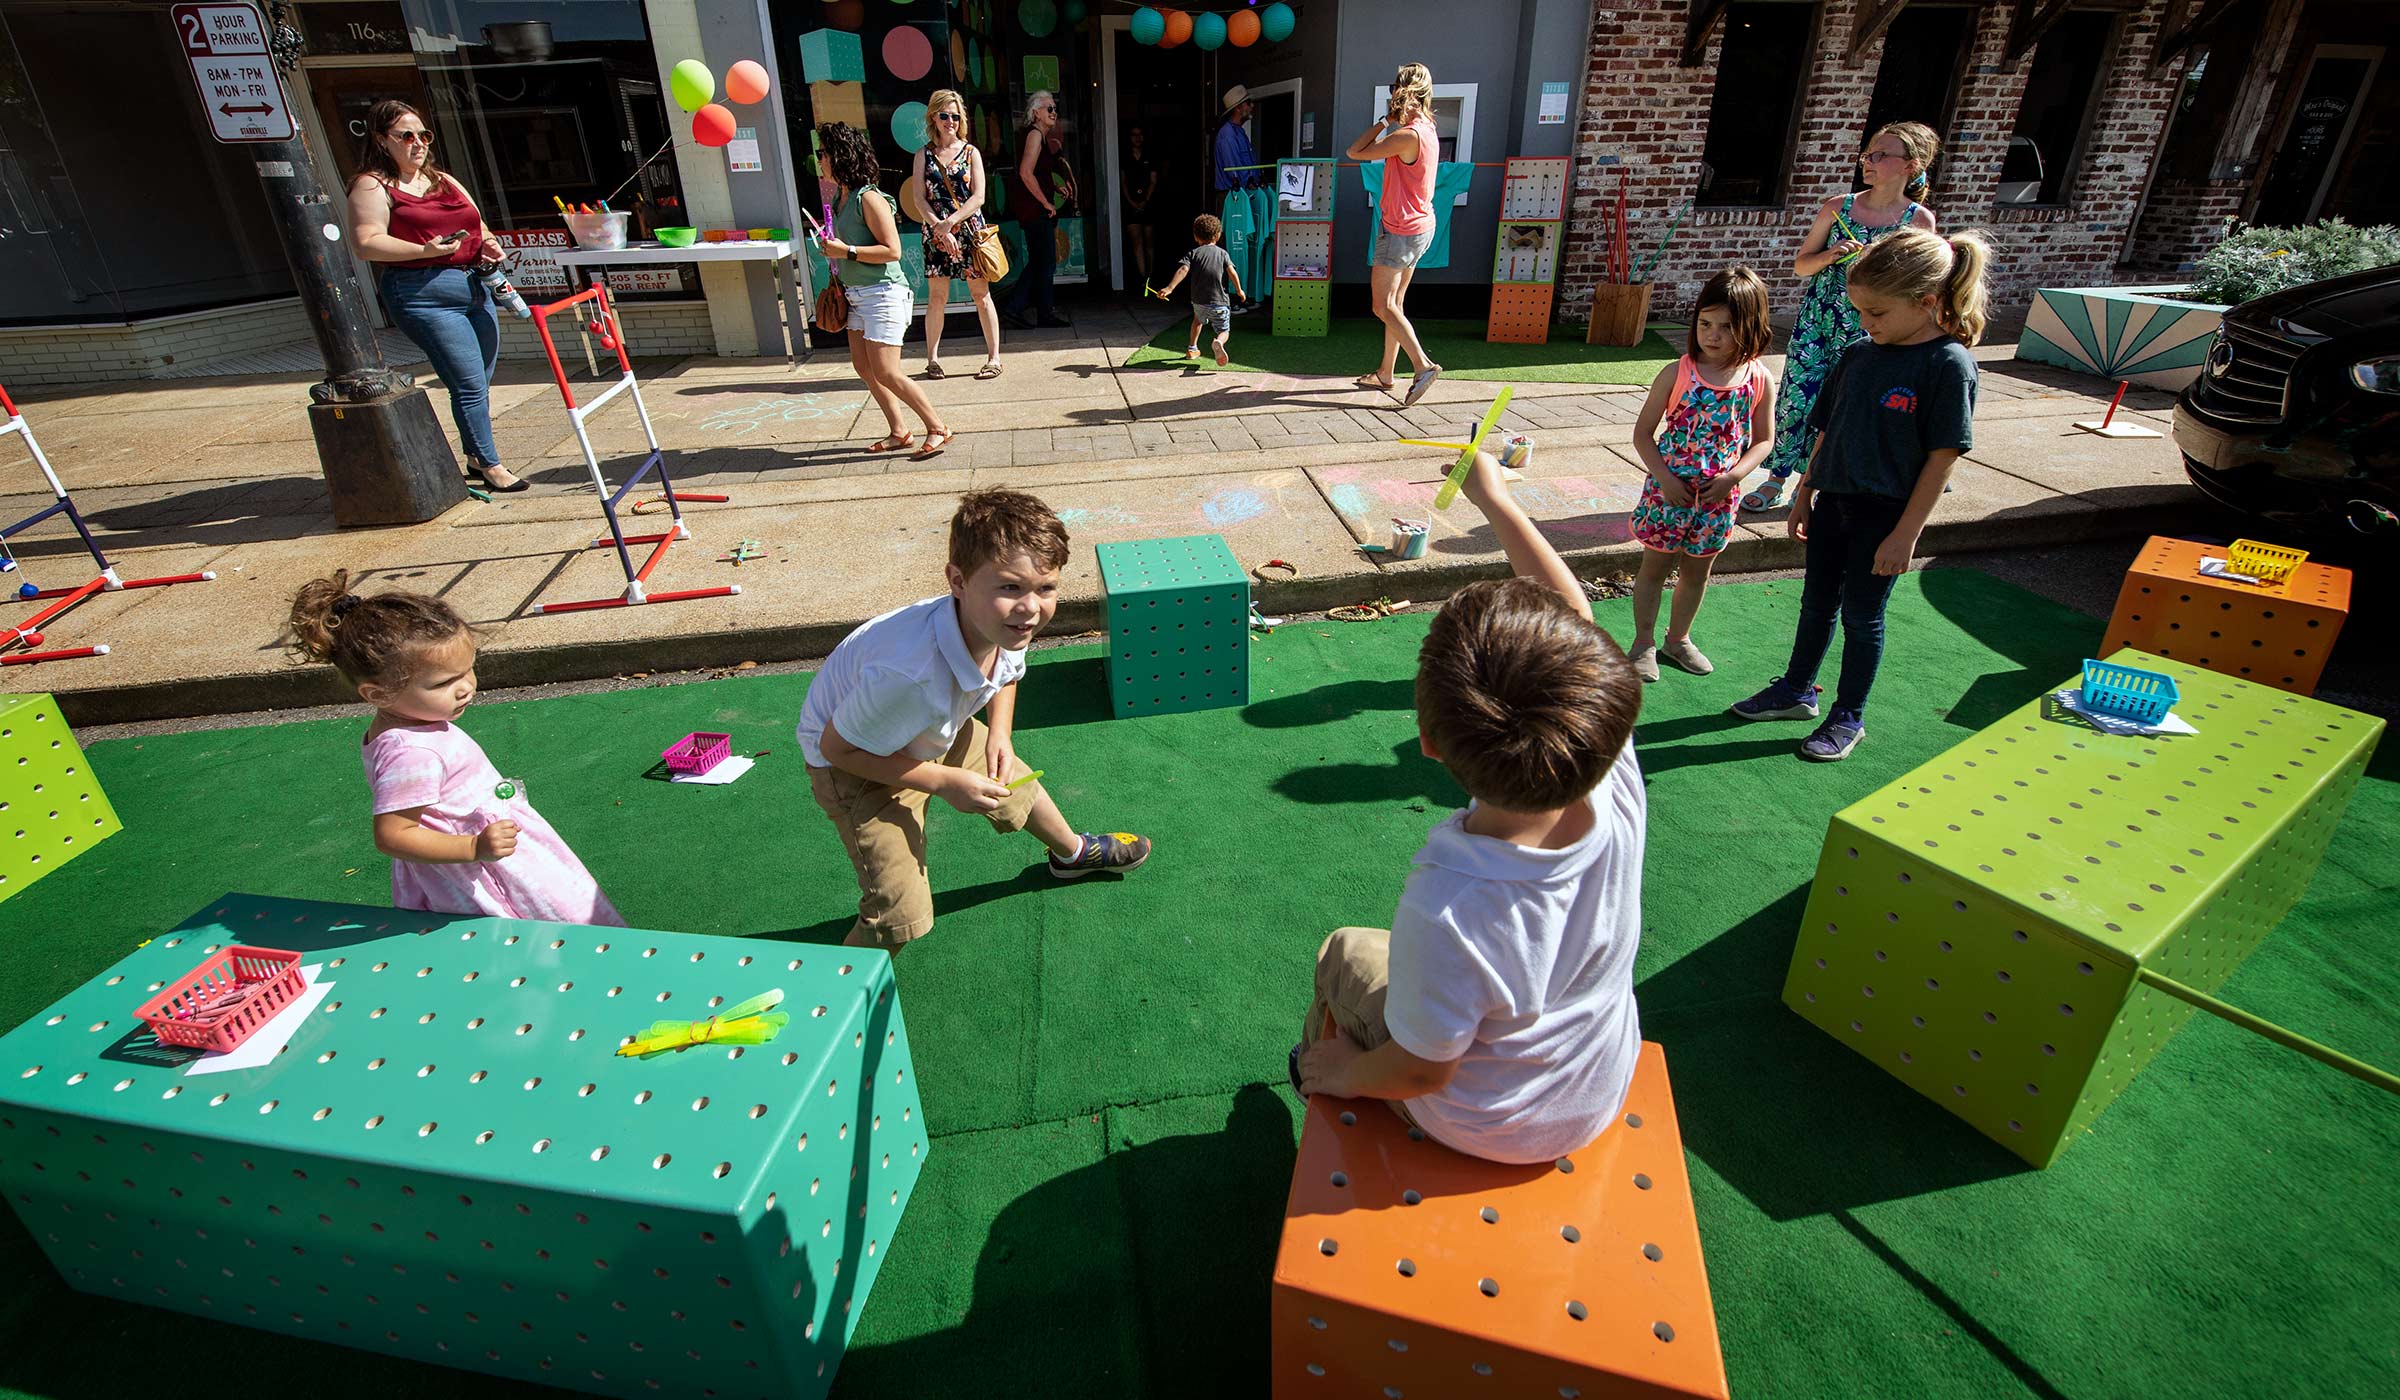 Children play and sit on colorful SITSY modules placed on astroturf outside The Idea Shop in downtown Starkville.